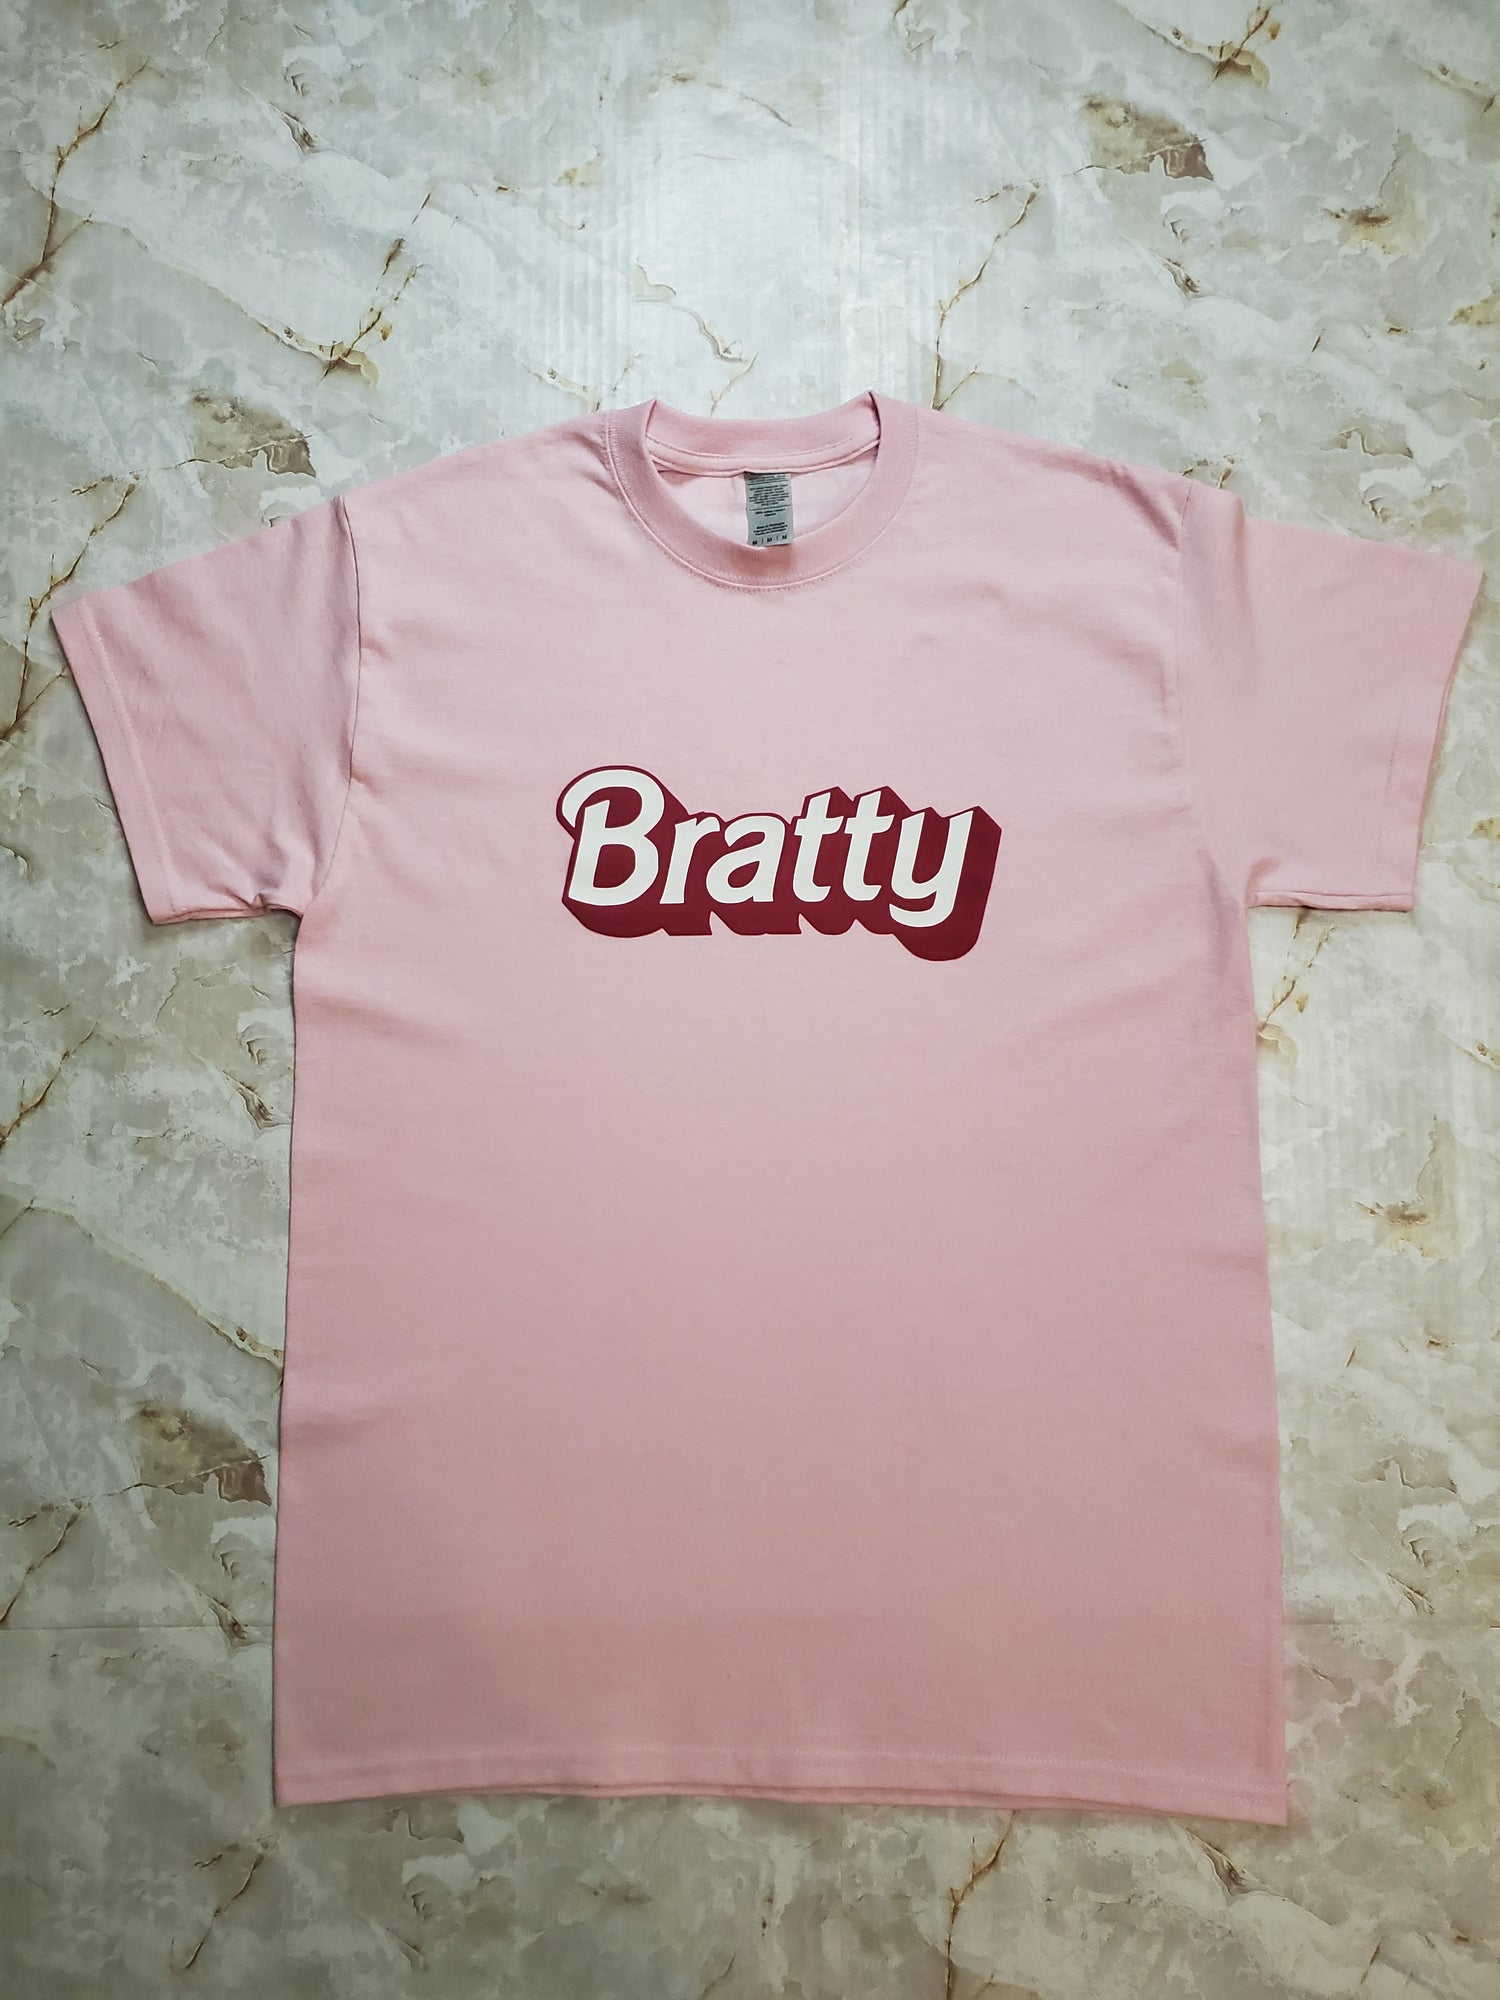 Bratty T-Shirt - Centre Ave Clothing Co.